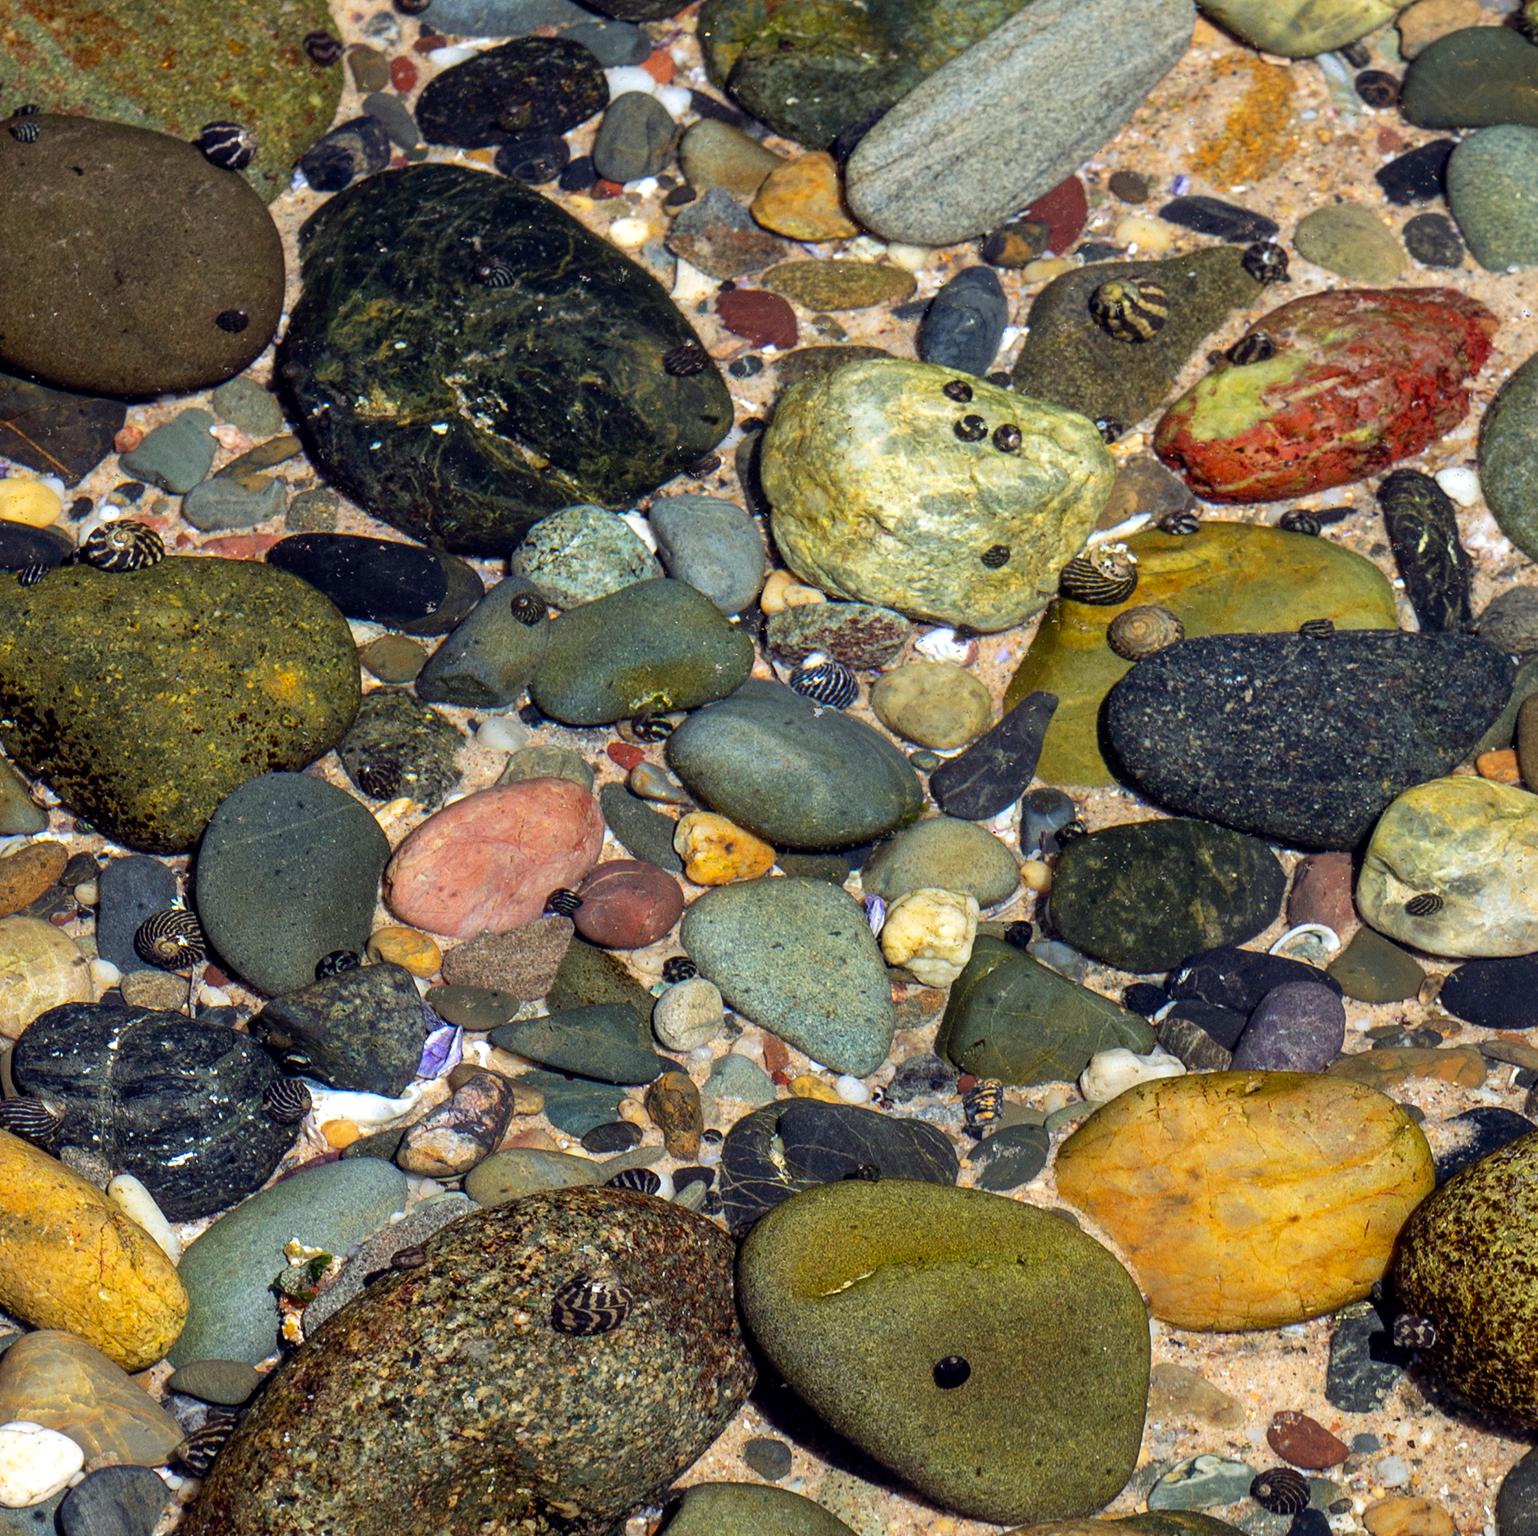 Tide Pool of multi-coloured stones. Yamba, Australia, 2019.
Photograph by Cosmo Condina of coloured stones in a tide pool. Yamba, Australia
Archival Pigment Print, 19” X 12.6”, Edition of 10. This is #3/10 in the edition.
 
